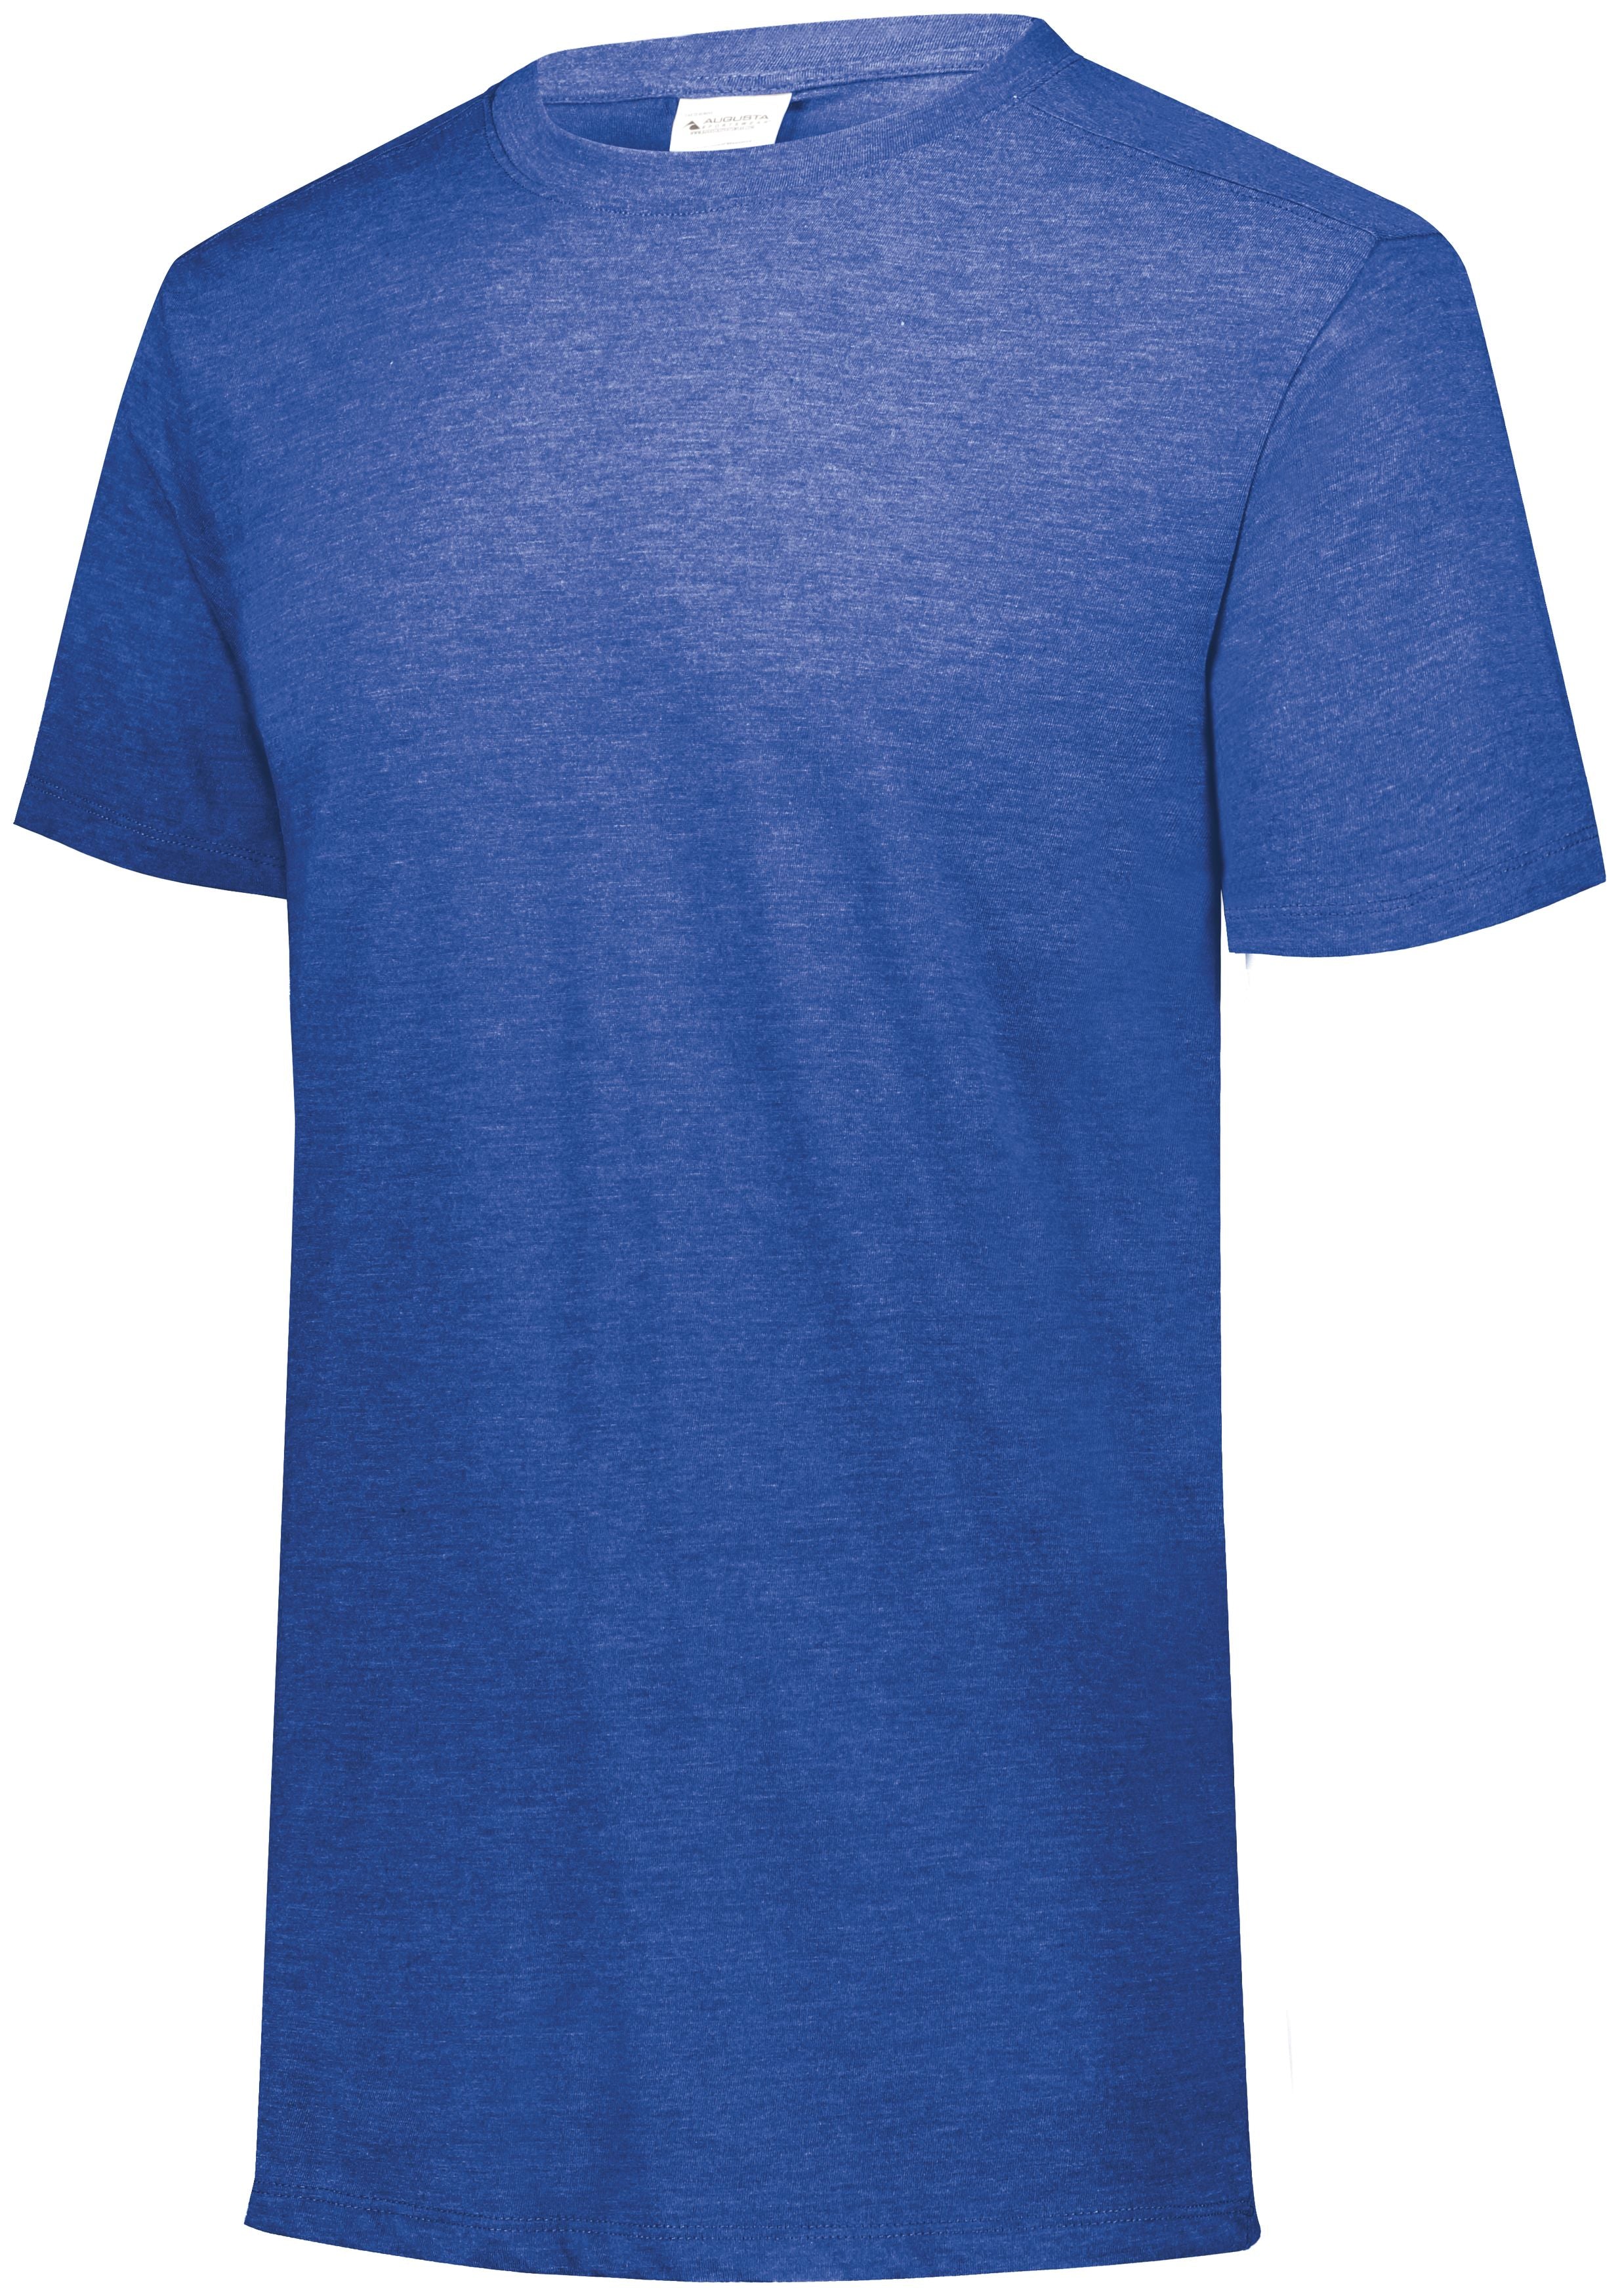 Augusta Sportswear Youth Tri-Blend T-Shirt in Royal Heather  -Part of the Youth, Youth-Tee-Shirt, T-Shirts, Augusta-Products, Shirts product lines at KanaleyCreations.com